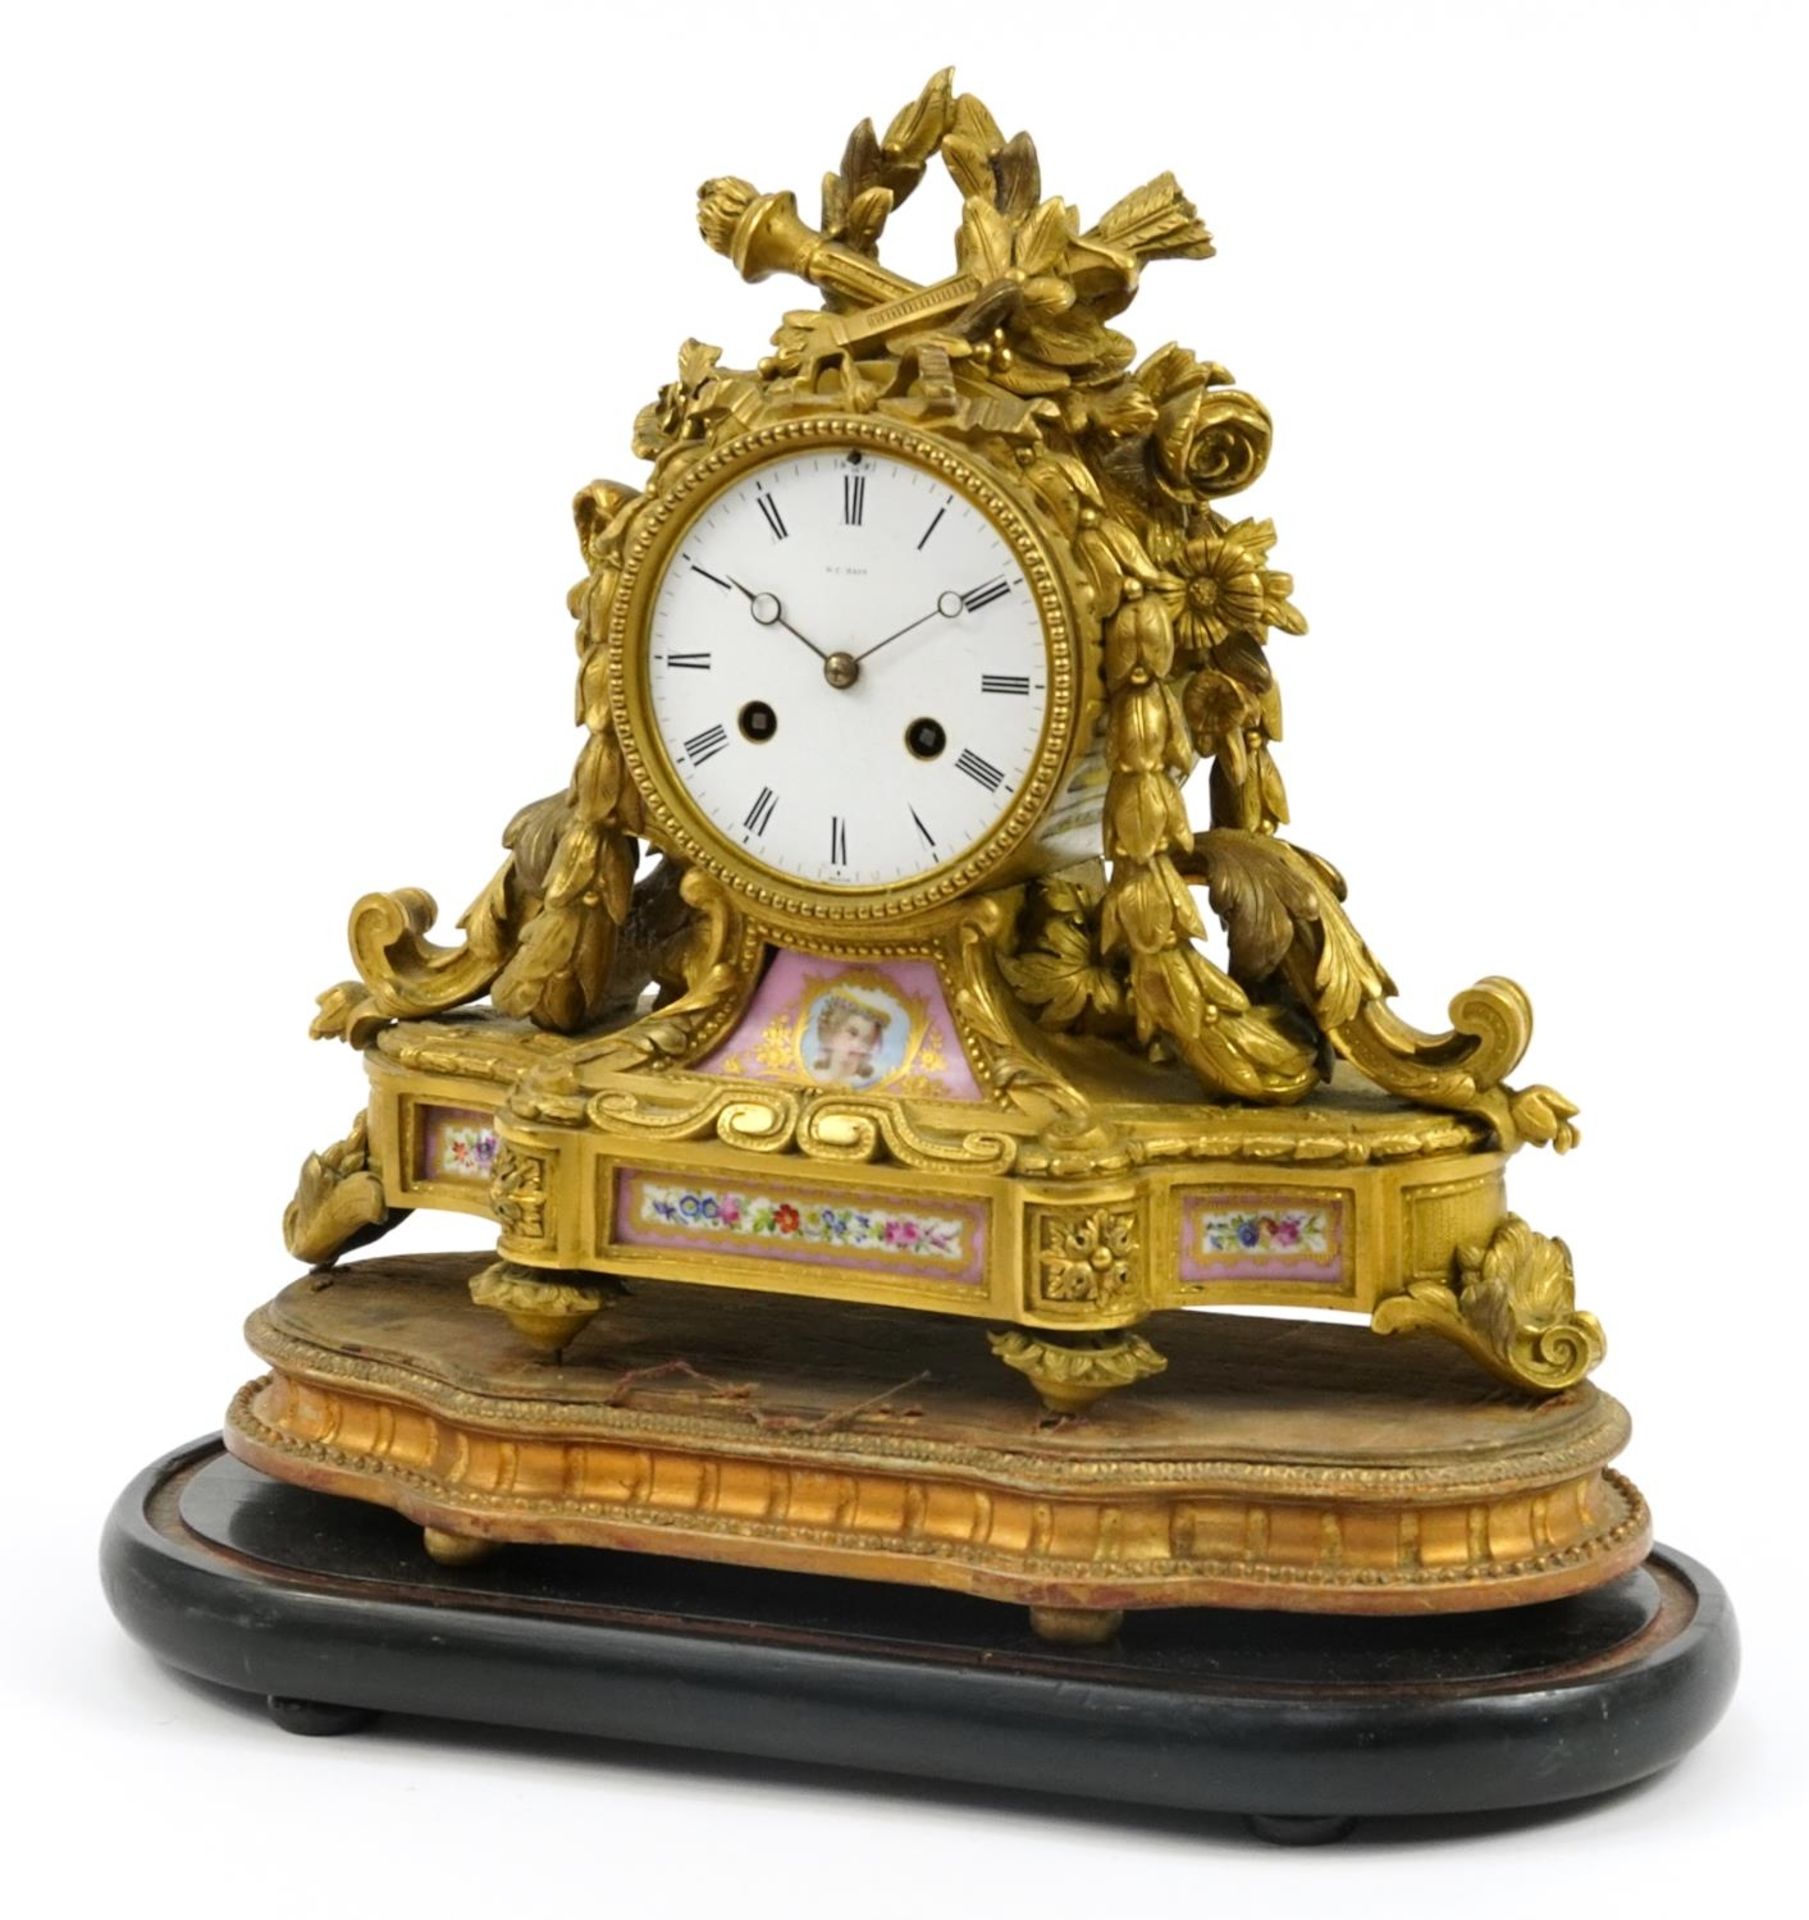 D C Rait, 19th century French Ormolu mantle clock striking on a bell with Sevres type panels hand